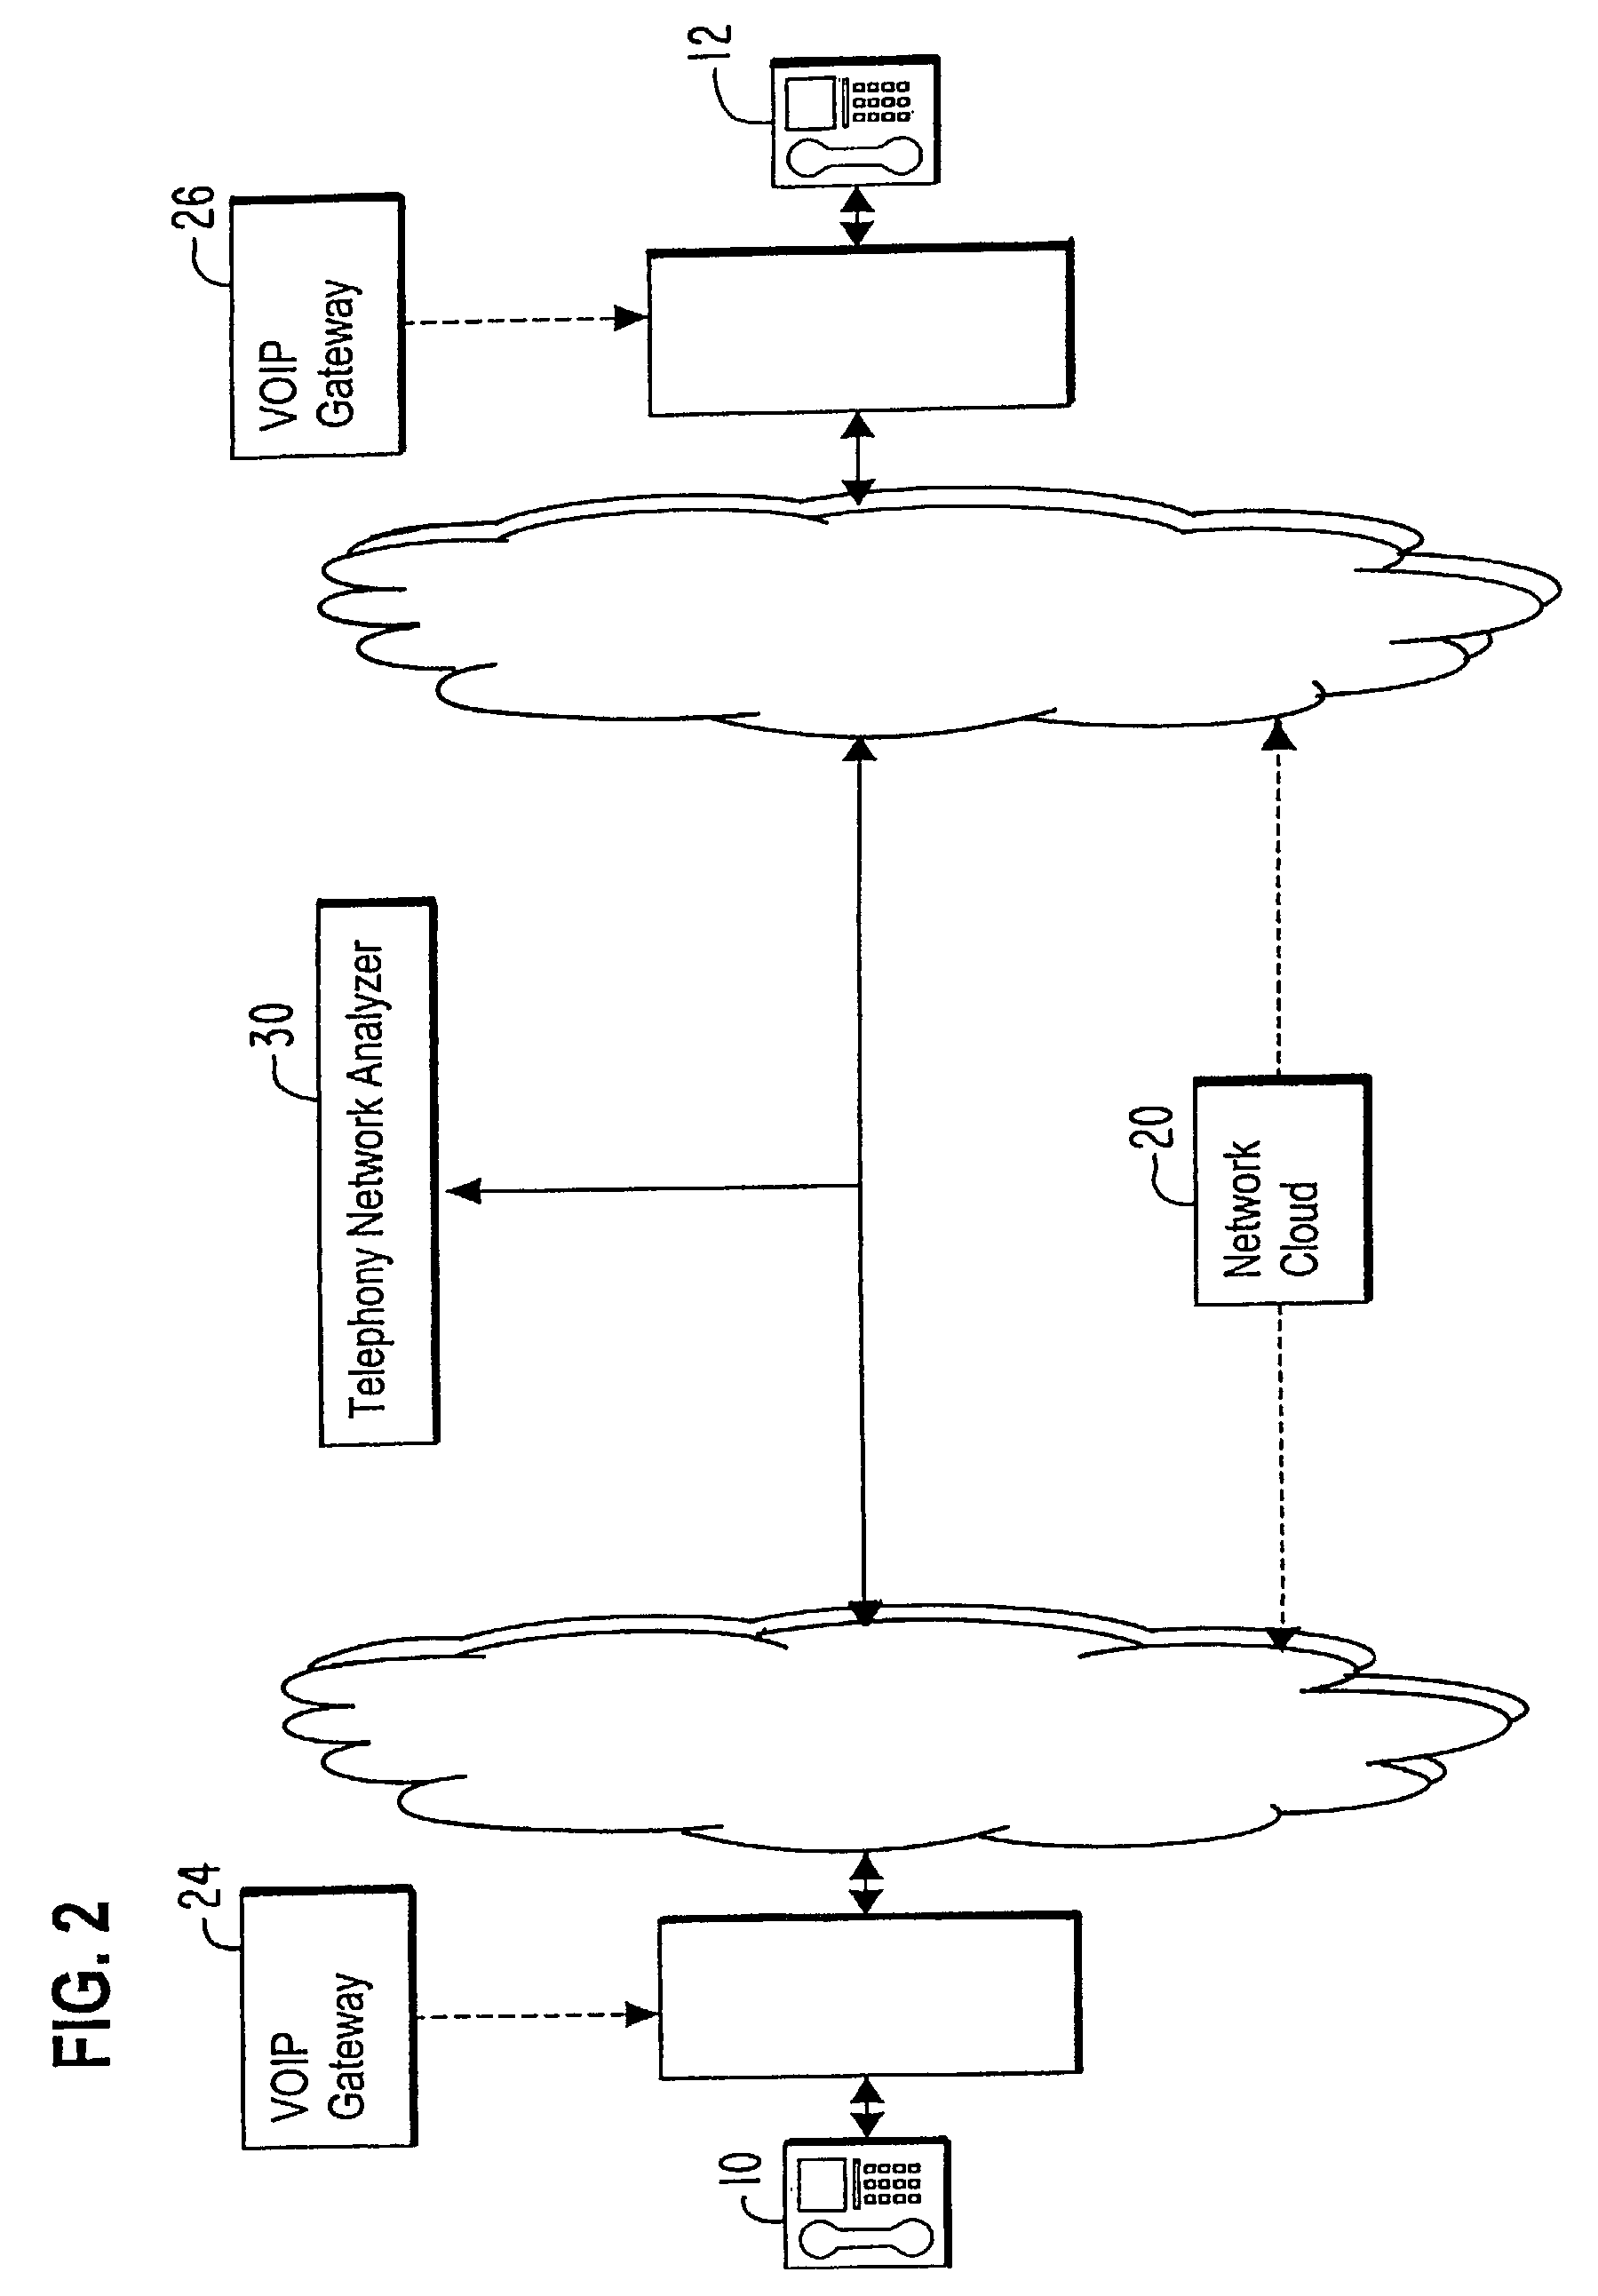 System and method to calculate round trip delay for real time protocol packet streams